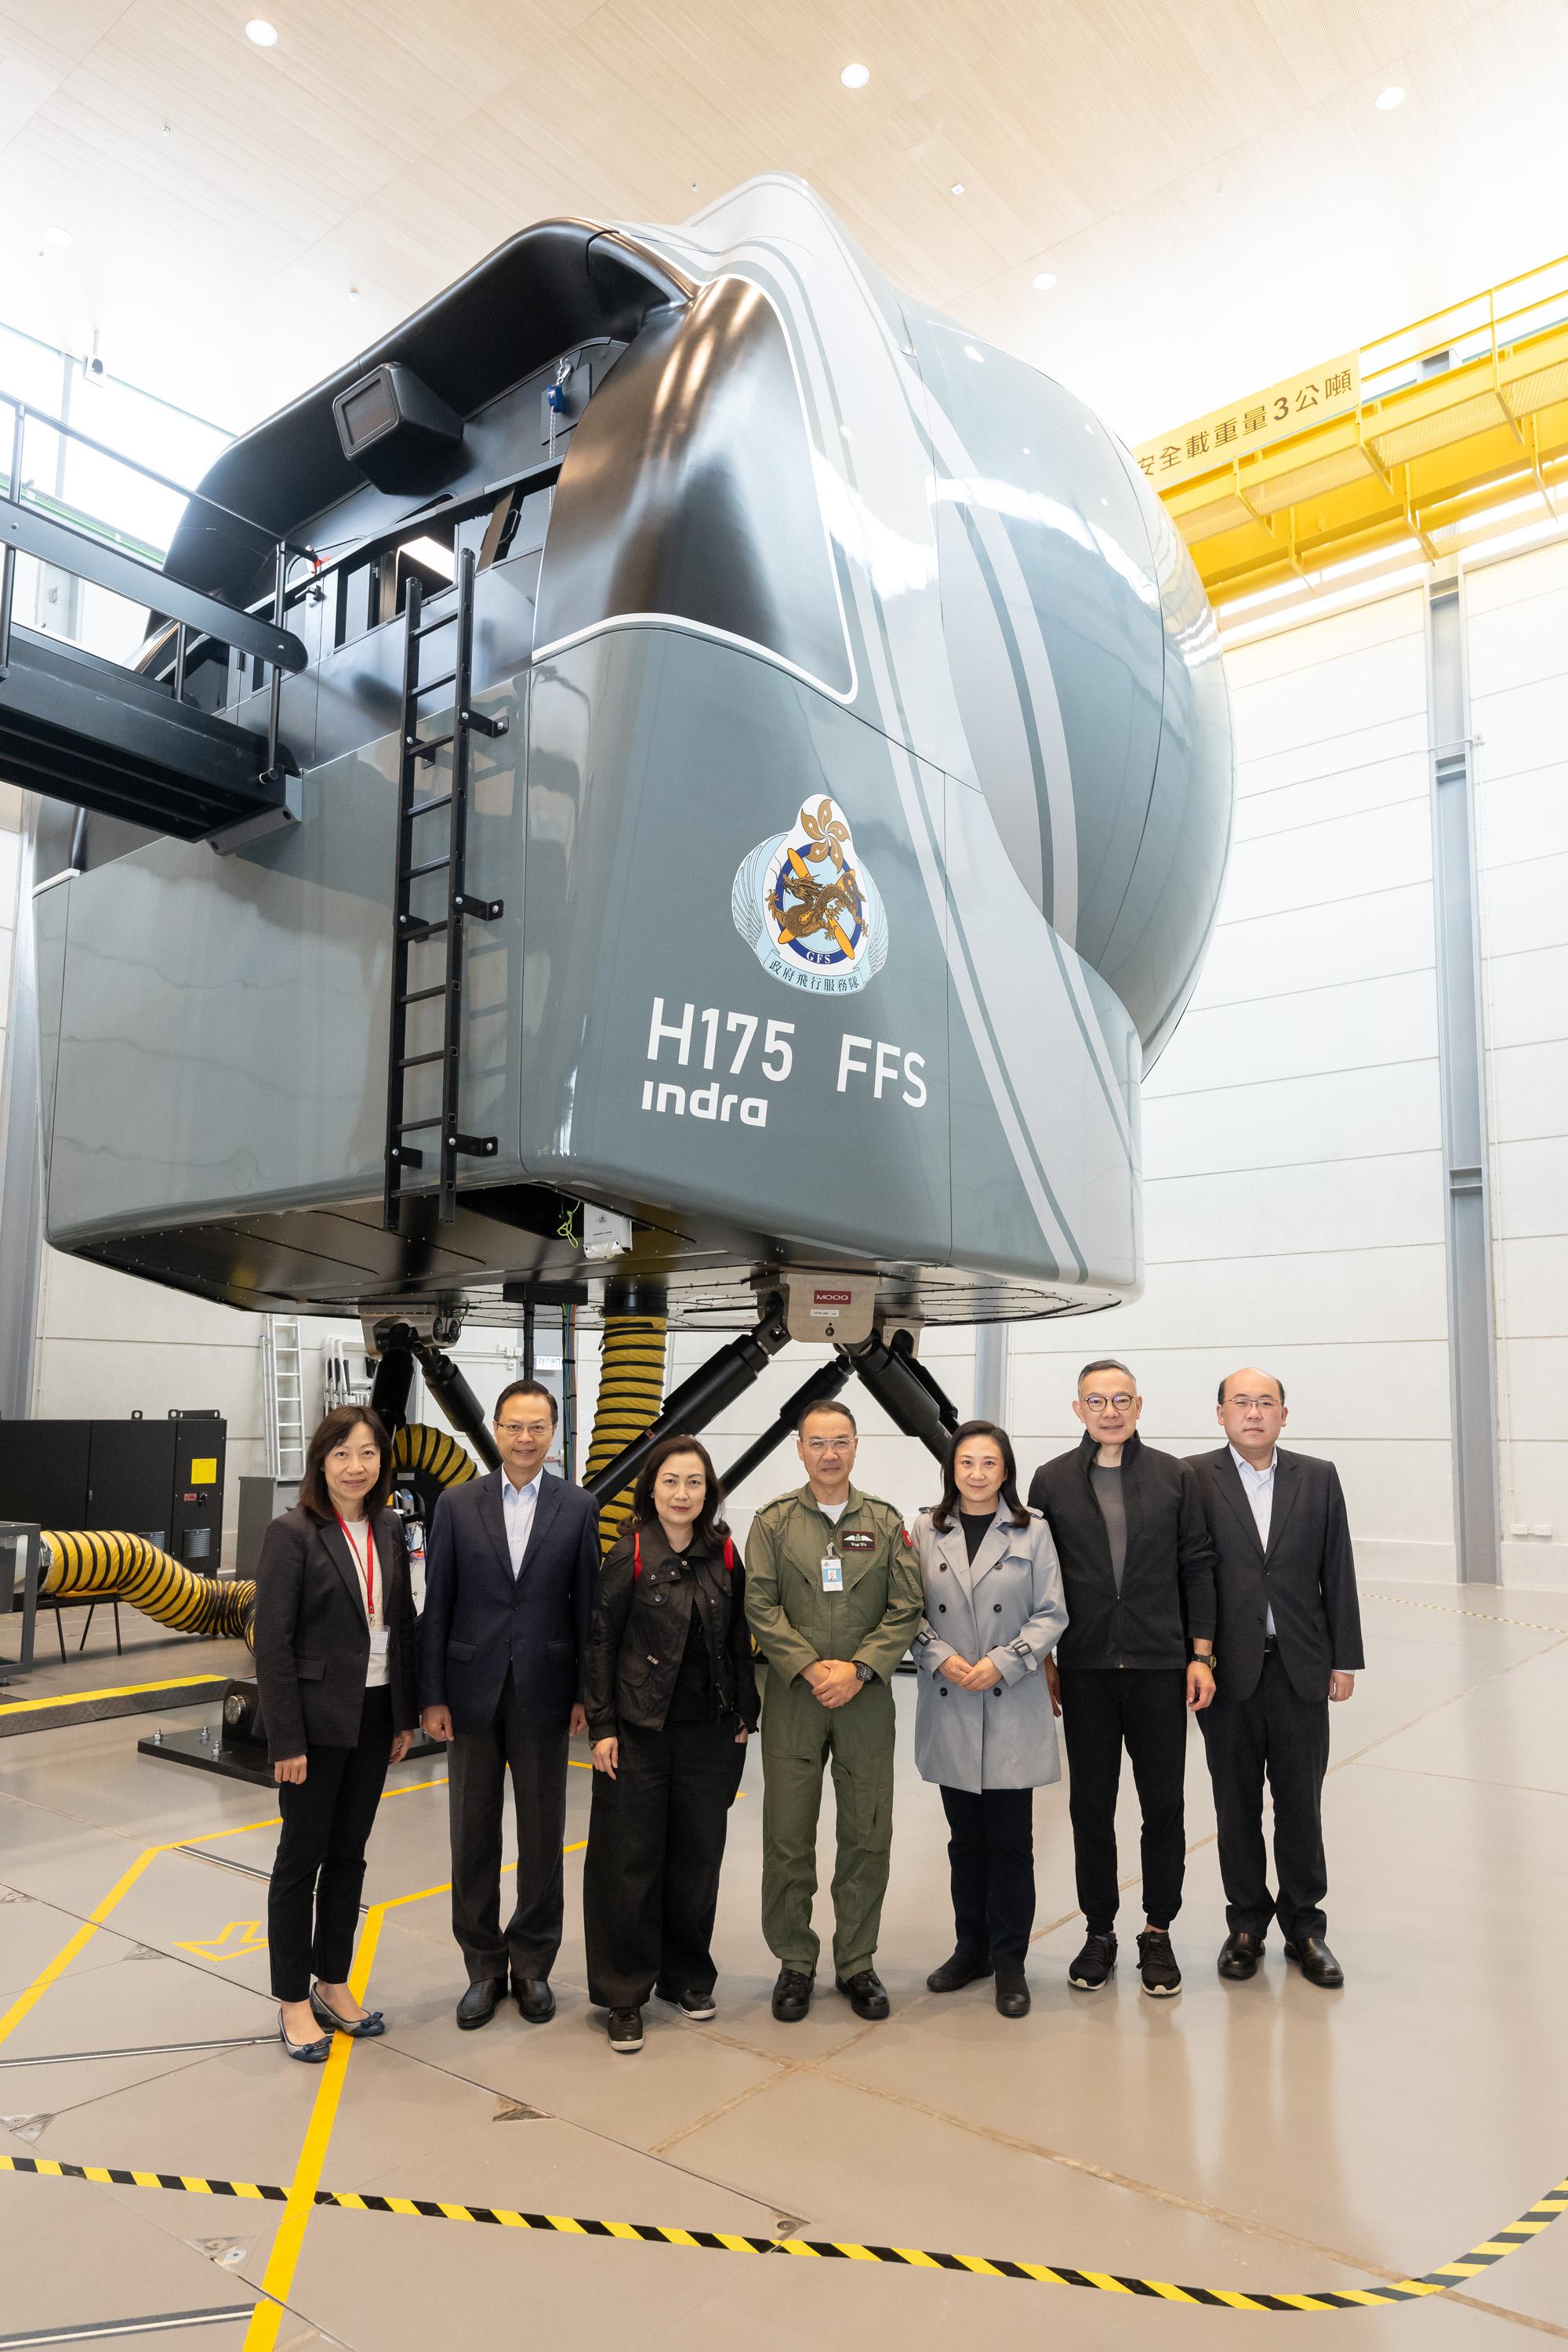 The Legislative Council (LegCo) Panel on Security visited facilities of two disciplined services today (May 9). Photo shows the Deputy Chairman of the Panel, Ms Carmen Kan (third left), the Controller of the Government Flying Service (GFS), Captain West Wu (fourth left), and other LegCo Members posing for a group photo at the Flight Simulator Training Centre in the Headquarters of GFS.